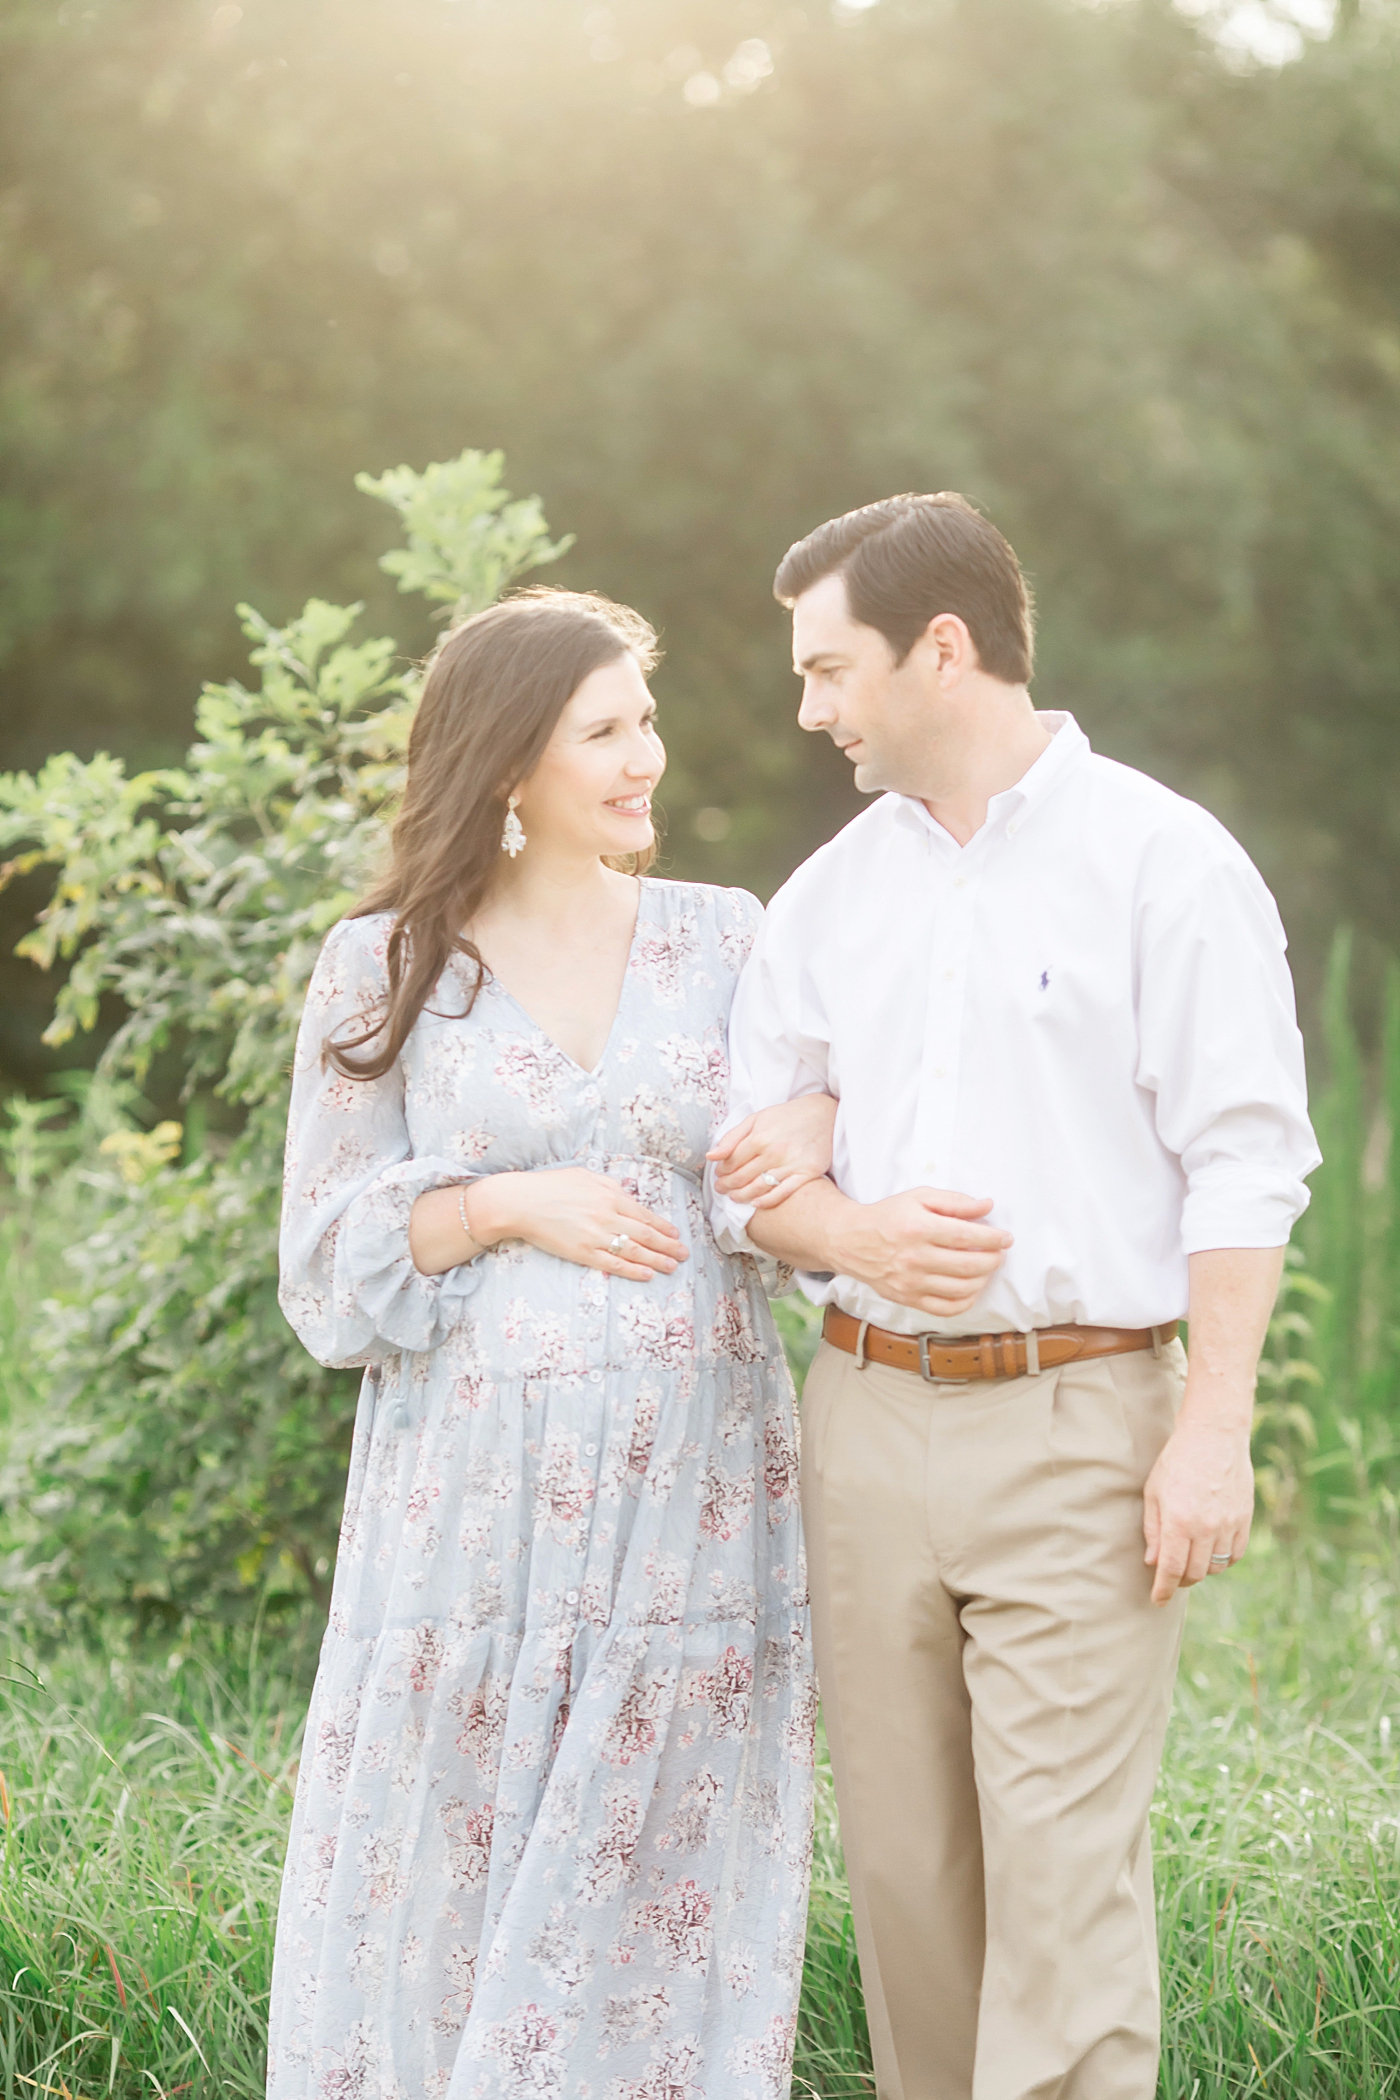 Maternity session outdoors in Houston at. sunset in beautiful fields. Photo by Fresh Light Photography.